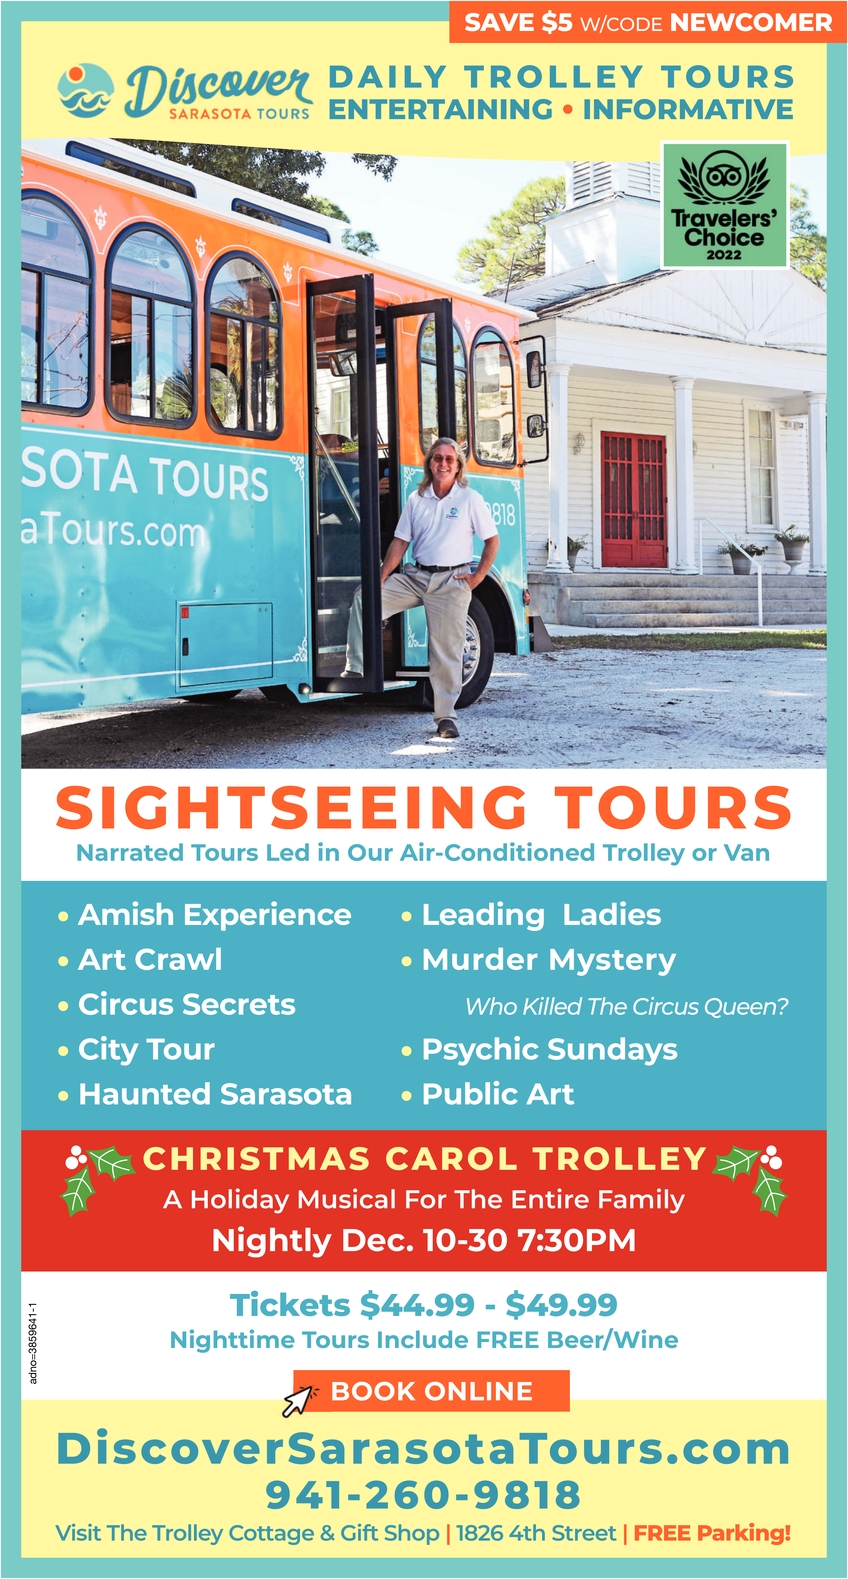 Daily Trolley Tours